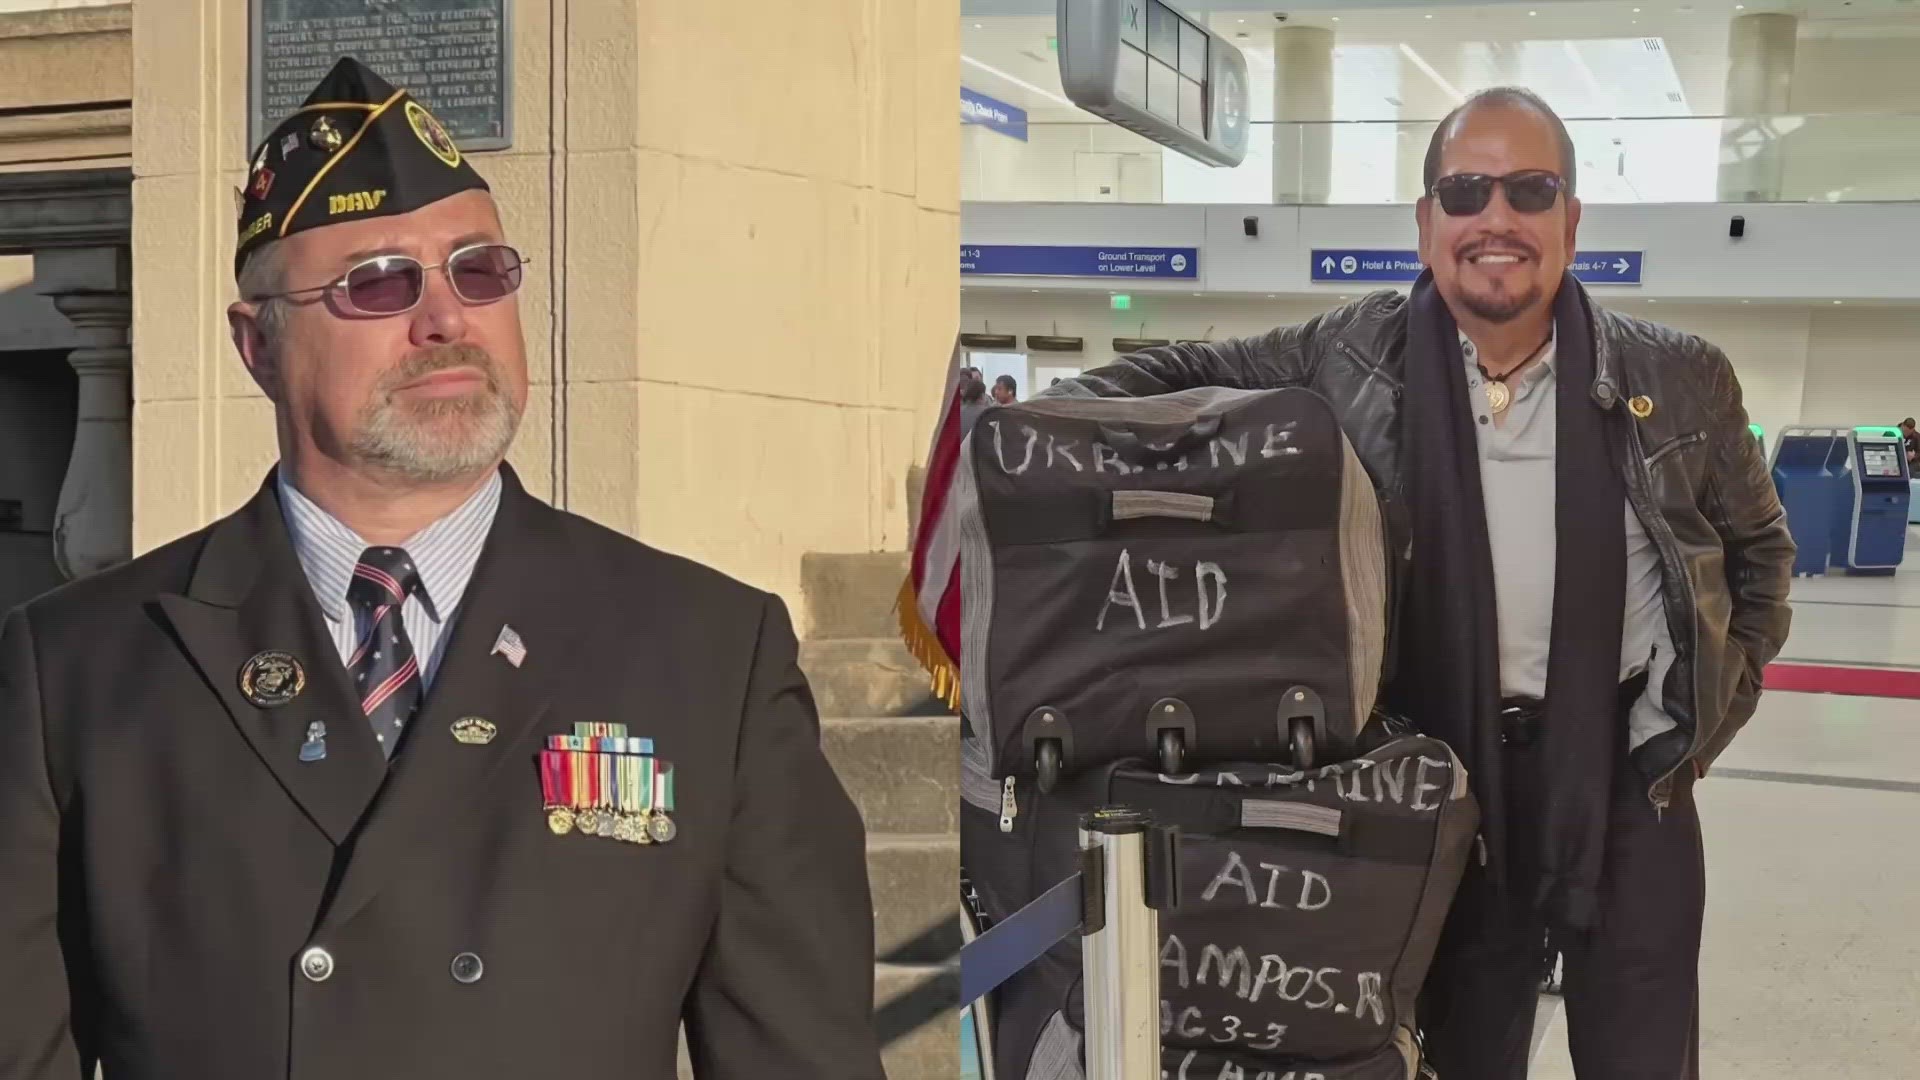 Stockton area Marine veterans Richard Campos and Michael Emerson are heading to Ukraine to provide aid during the war.